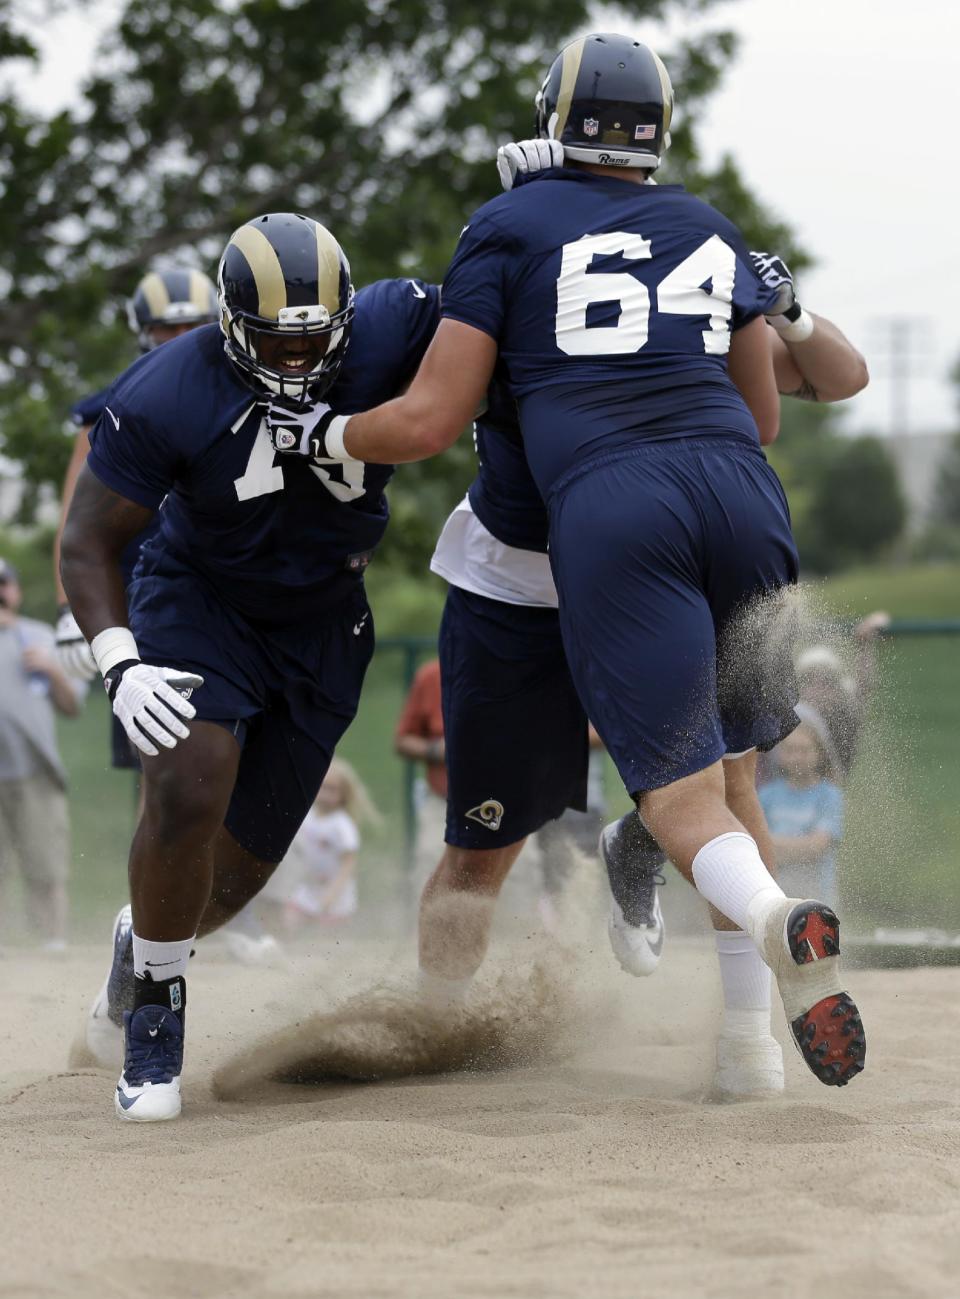 St. Louis Rams' Greg Robinson, left, pushes tackle Sean Hooey (64) in a sand pit during training camp at the NFL football team's practice facility on Saturday, July 26, 2014, in St. Louis. (AP Photo/Jeff Roberson)